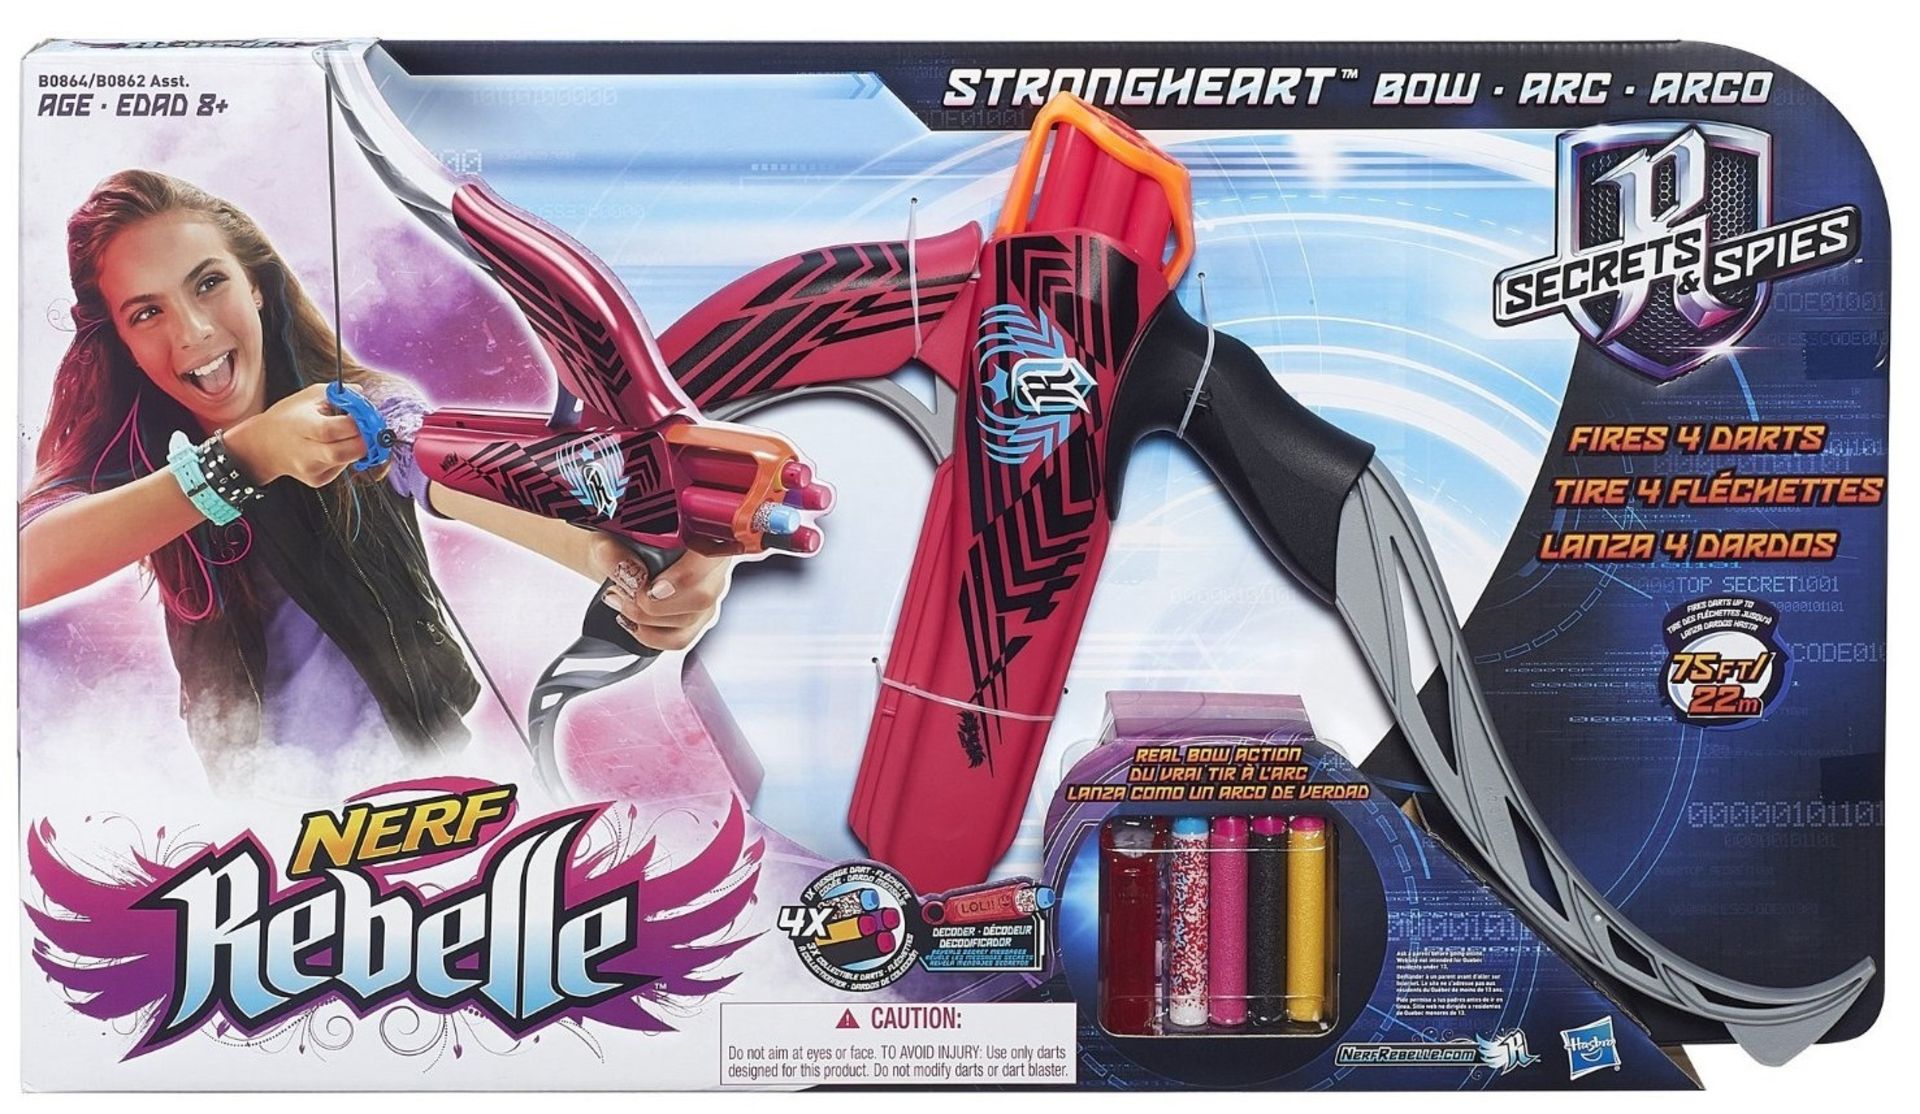 V Brand New Hasbro Nerf Rebelle Secrets And Spies Strongheart Bow With 4 Darts And Decoder Age 8+